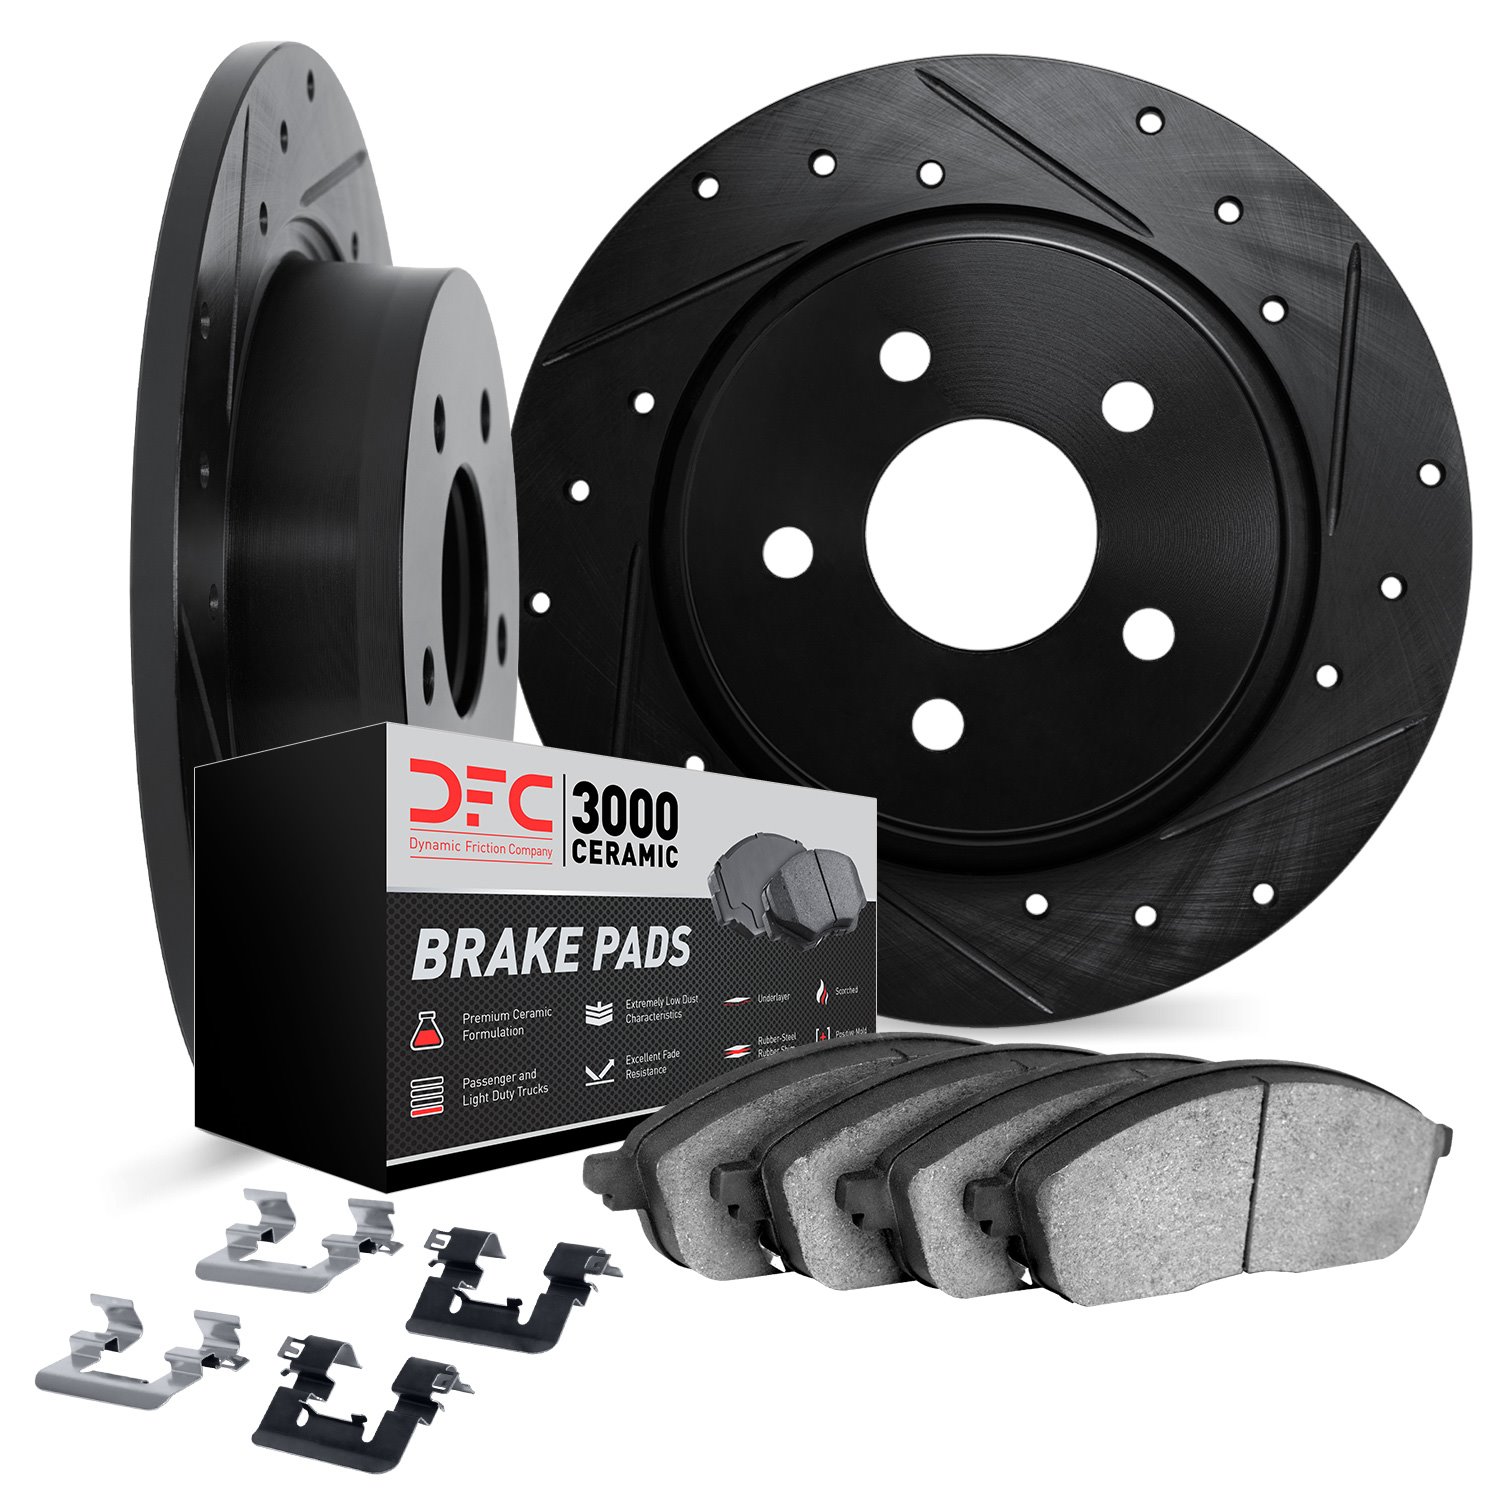 8312-80087 Drilled/Slotted Brake Rotors with 3000-Series Ceramic Brake Pads Kit & Hardware [Black], Fits Select Ford/Lincoln/Mer